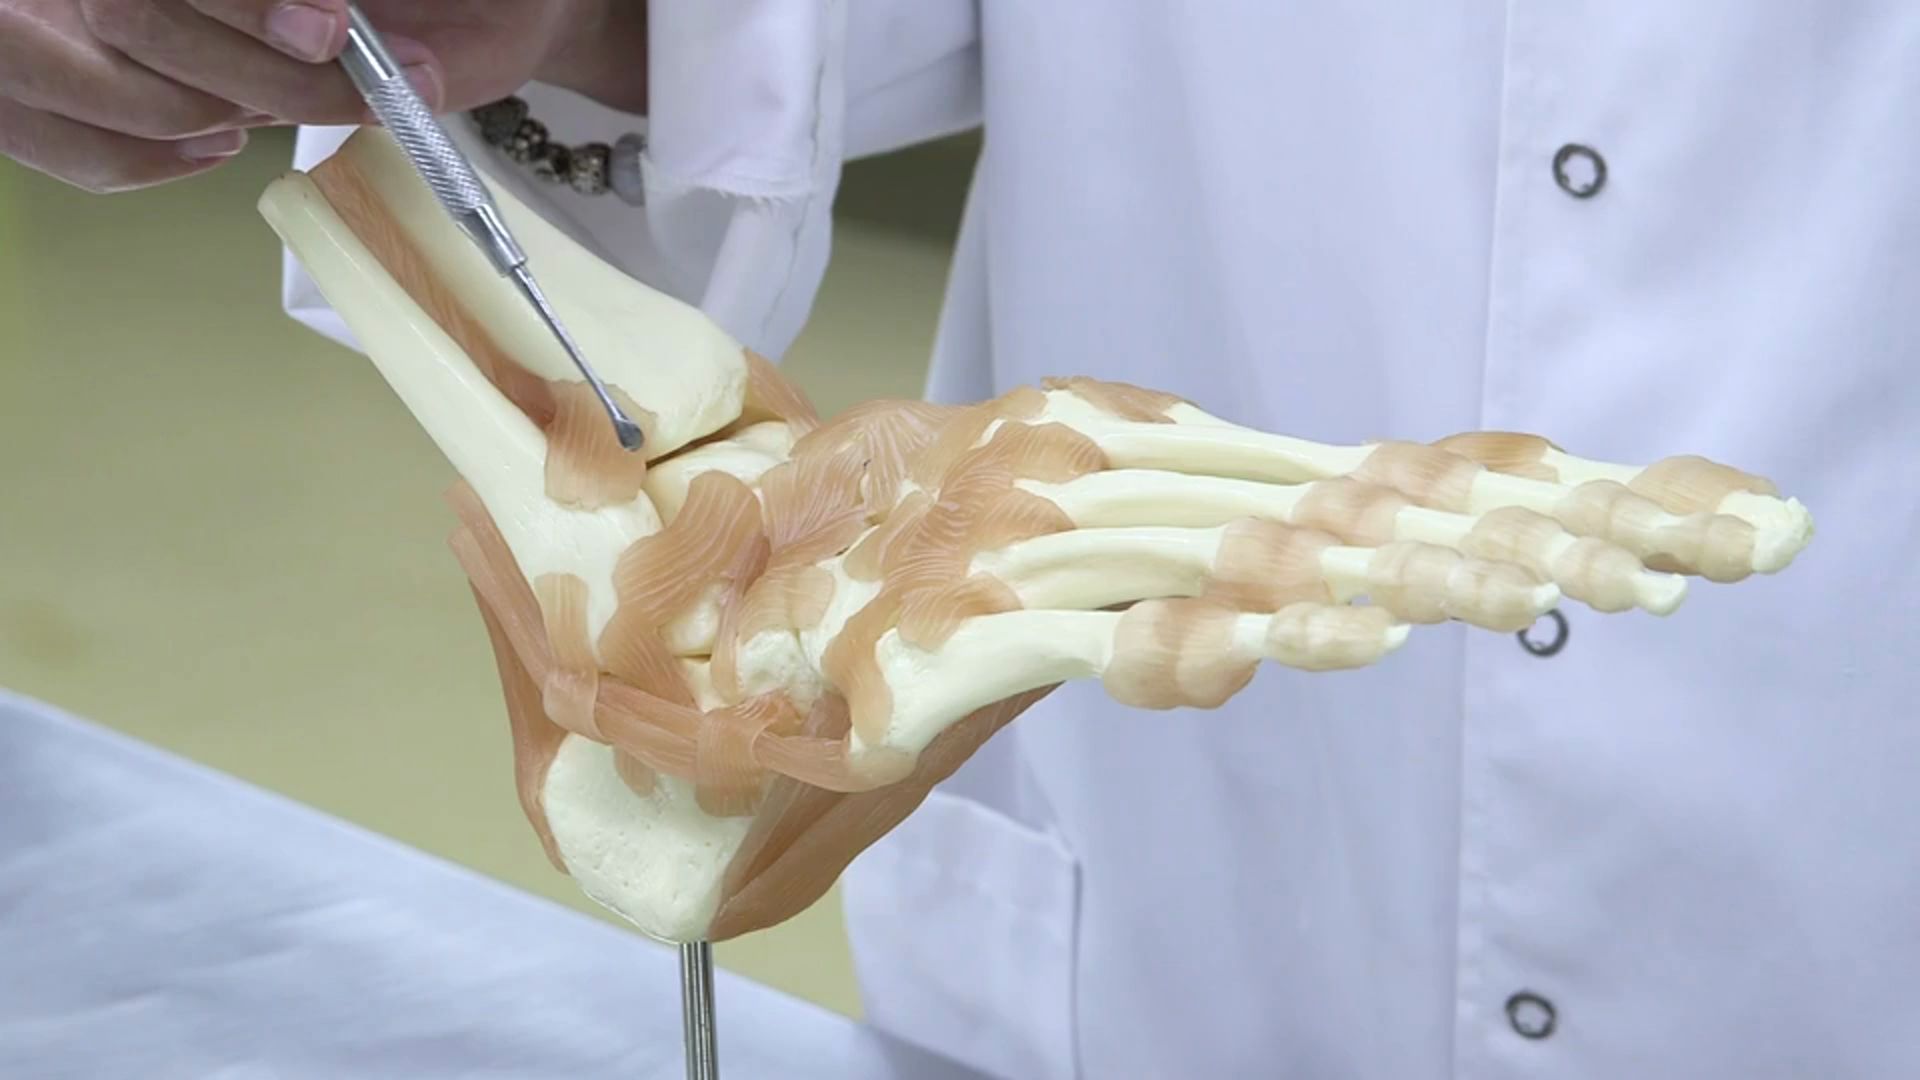 New anatomic ankle structure